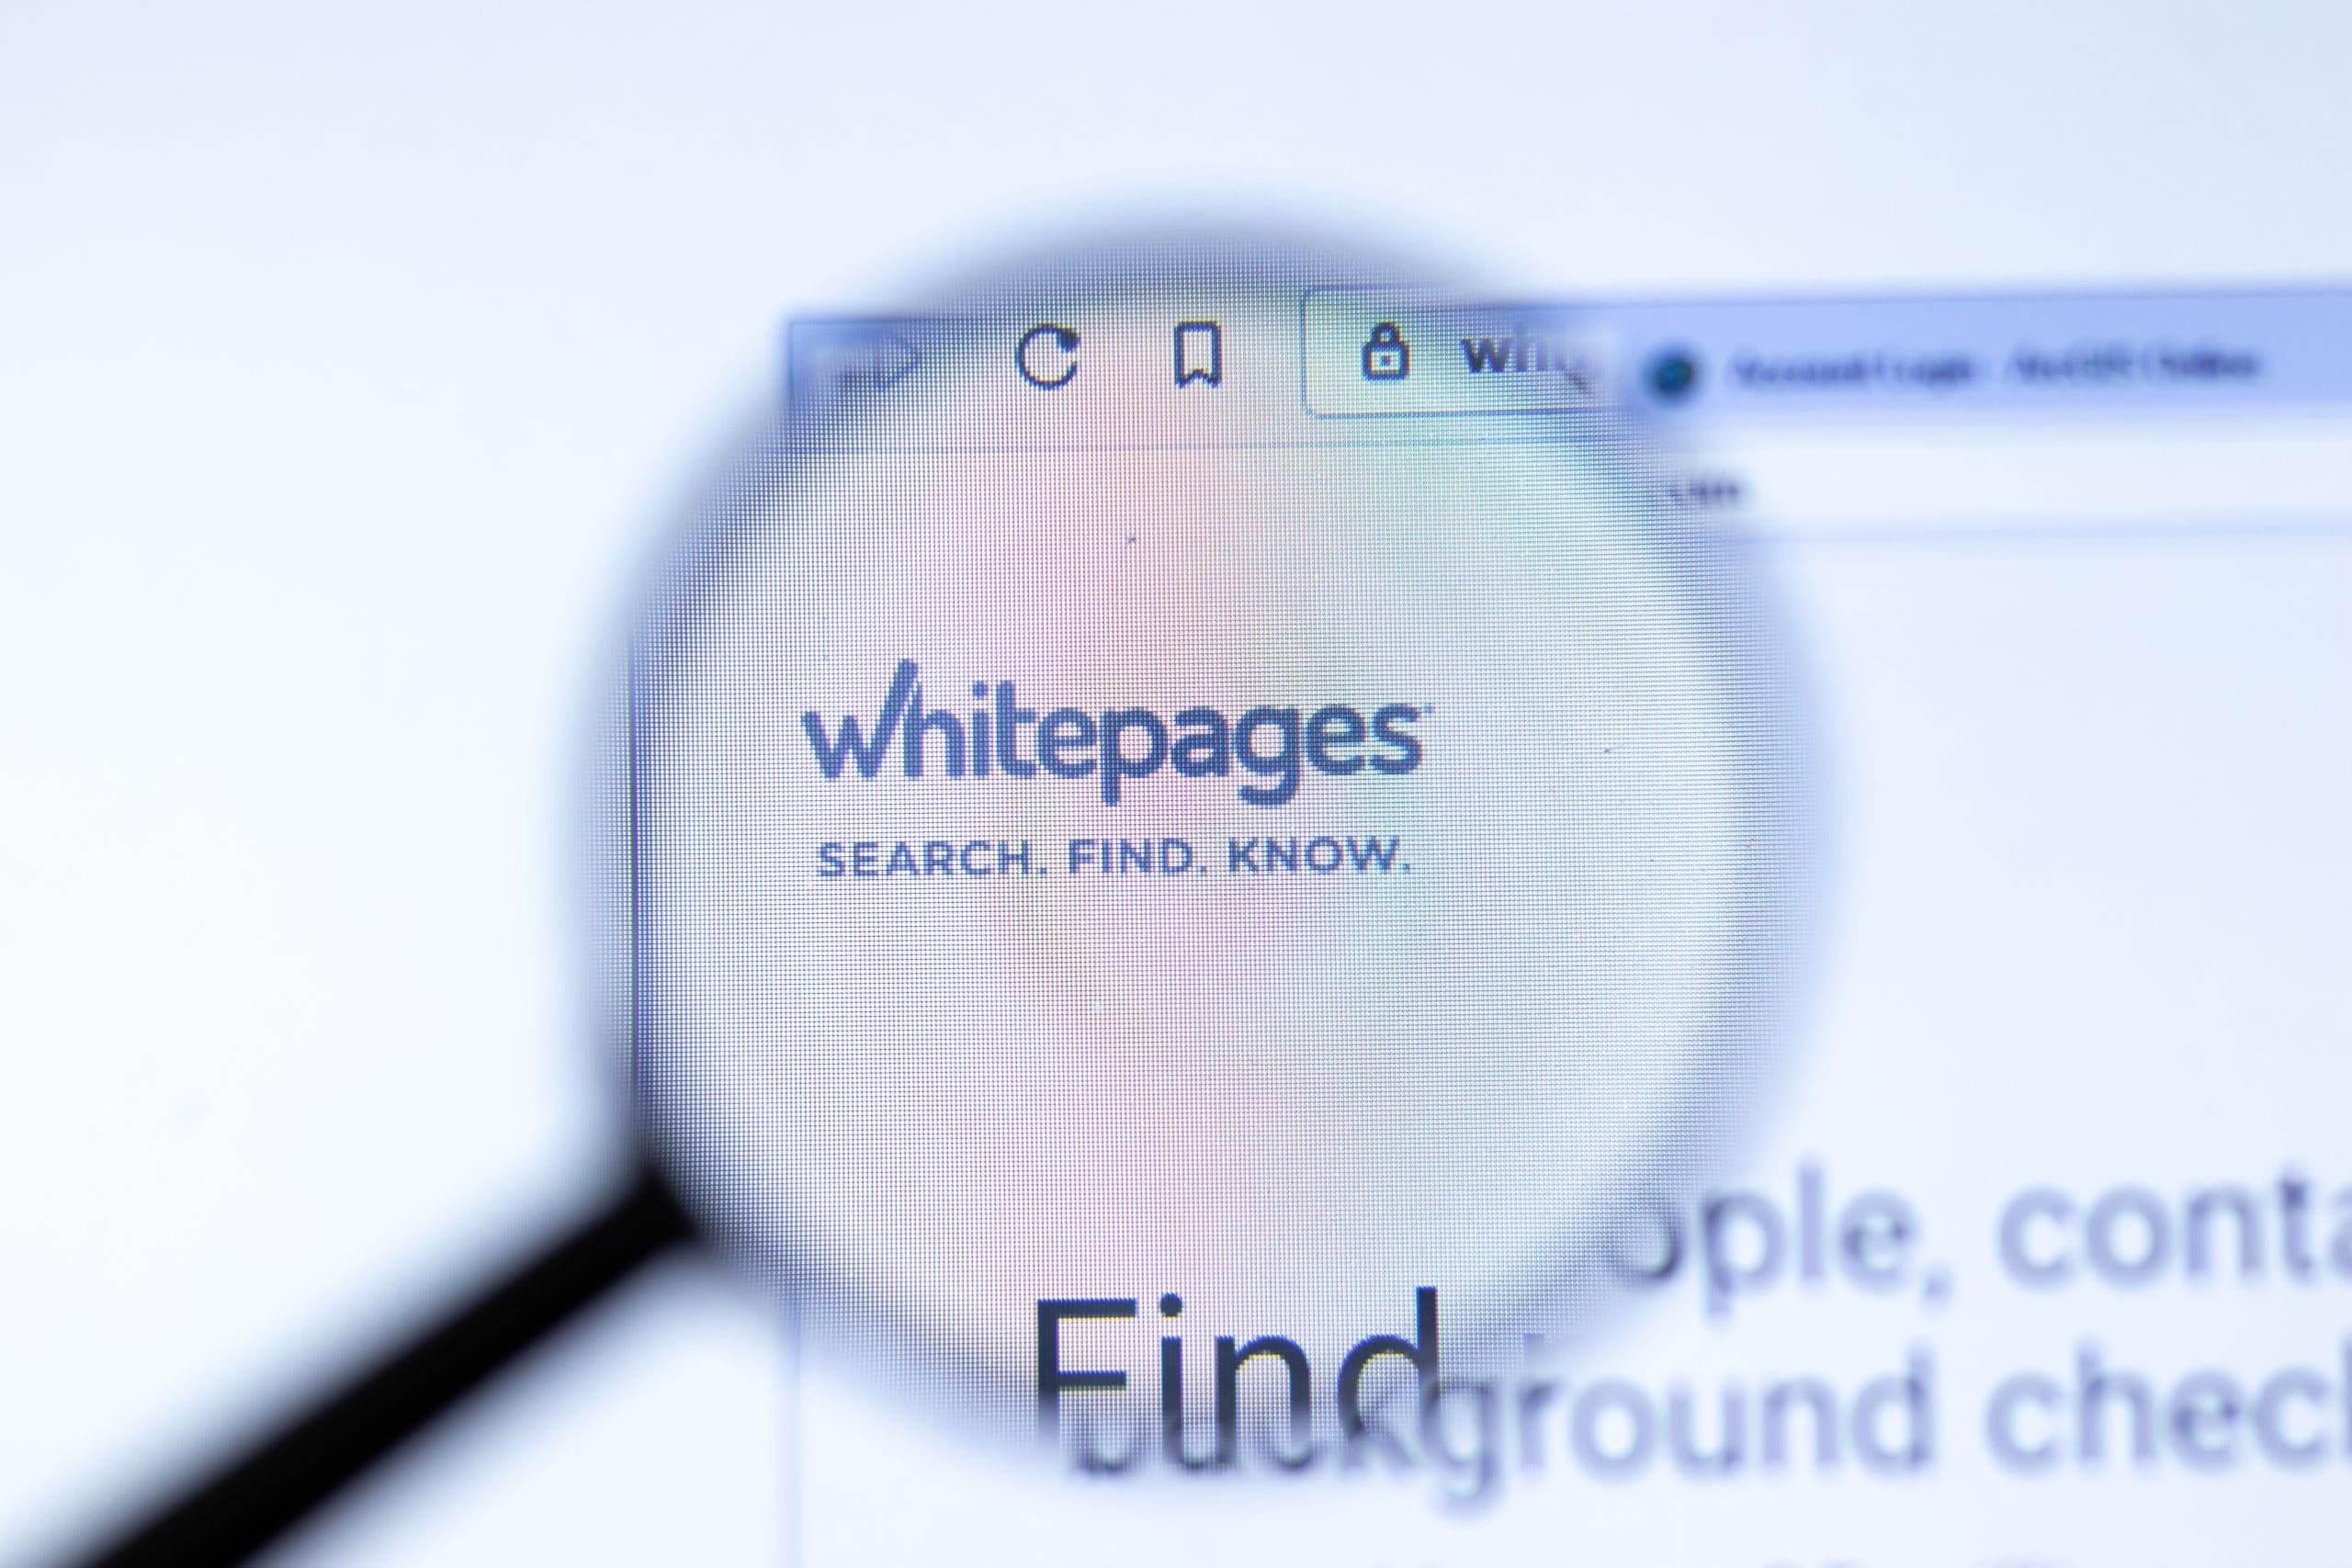 A magnifying glass is shown over the whitepages website.